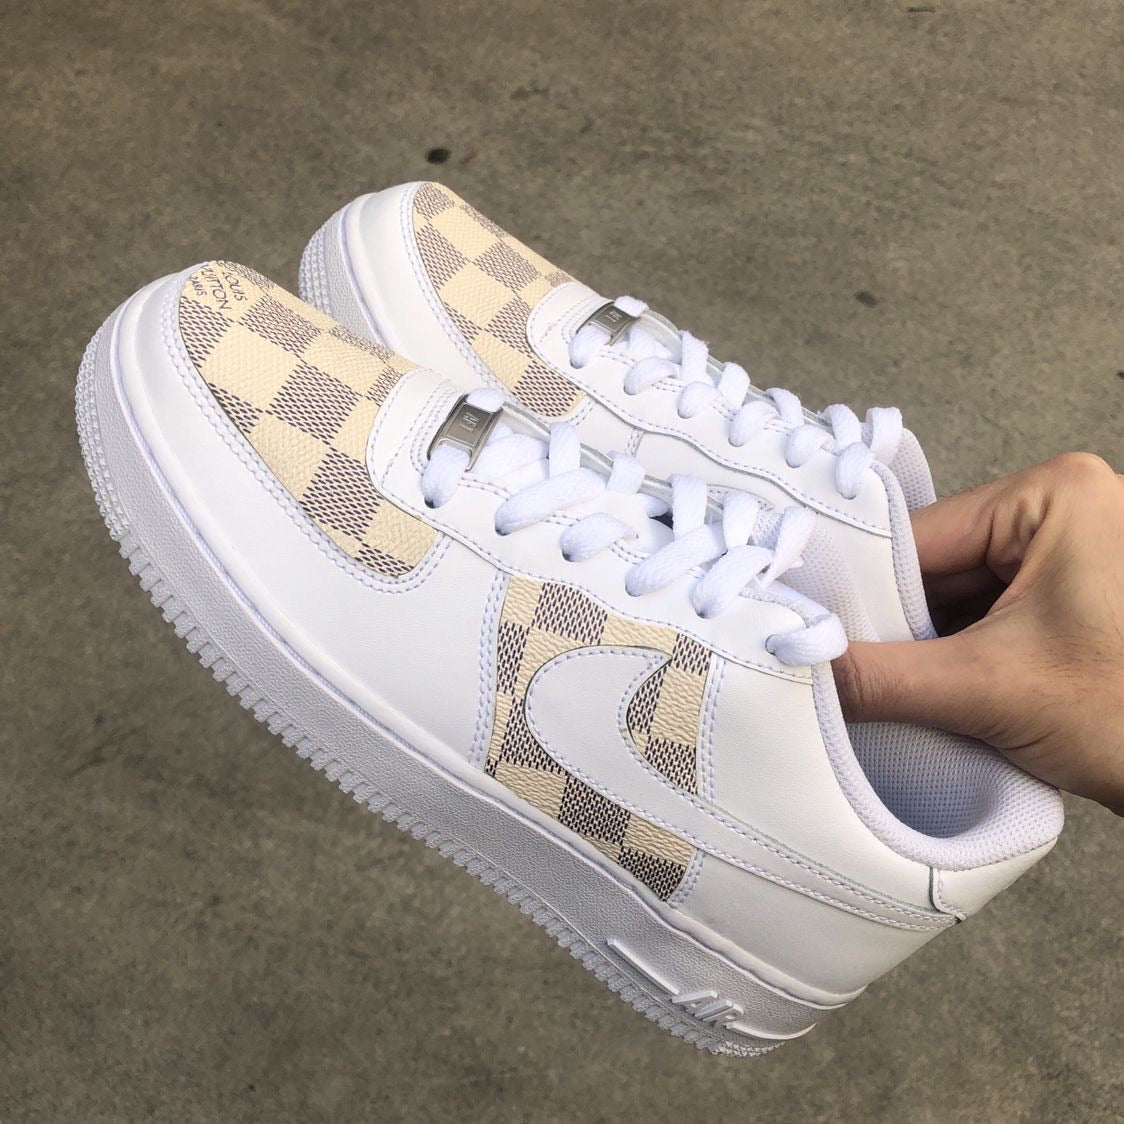 louis vuitton red air force ones｜TikTok Search